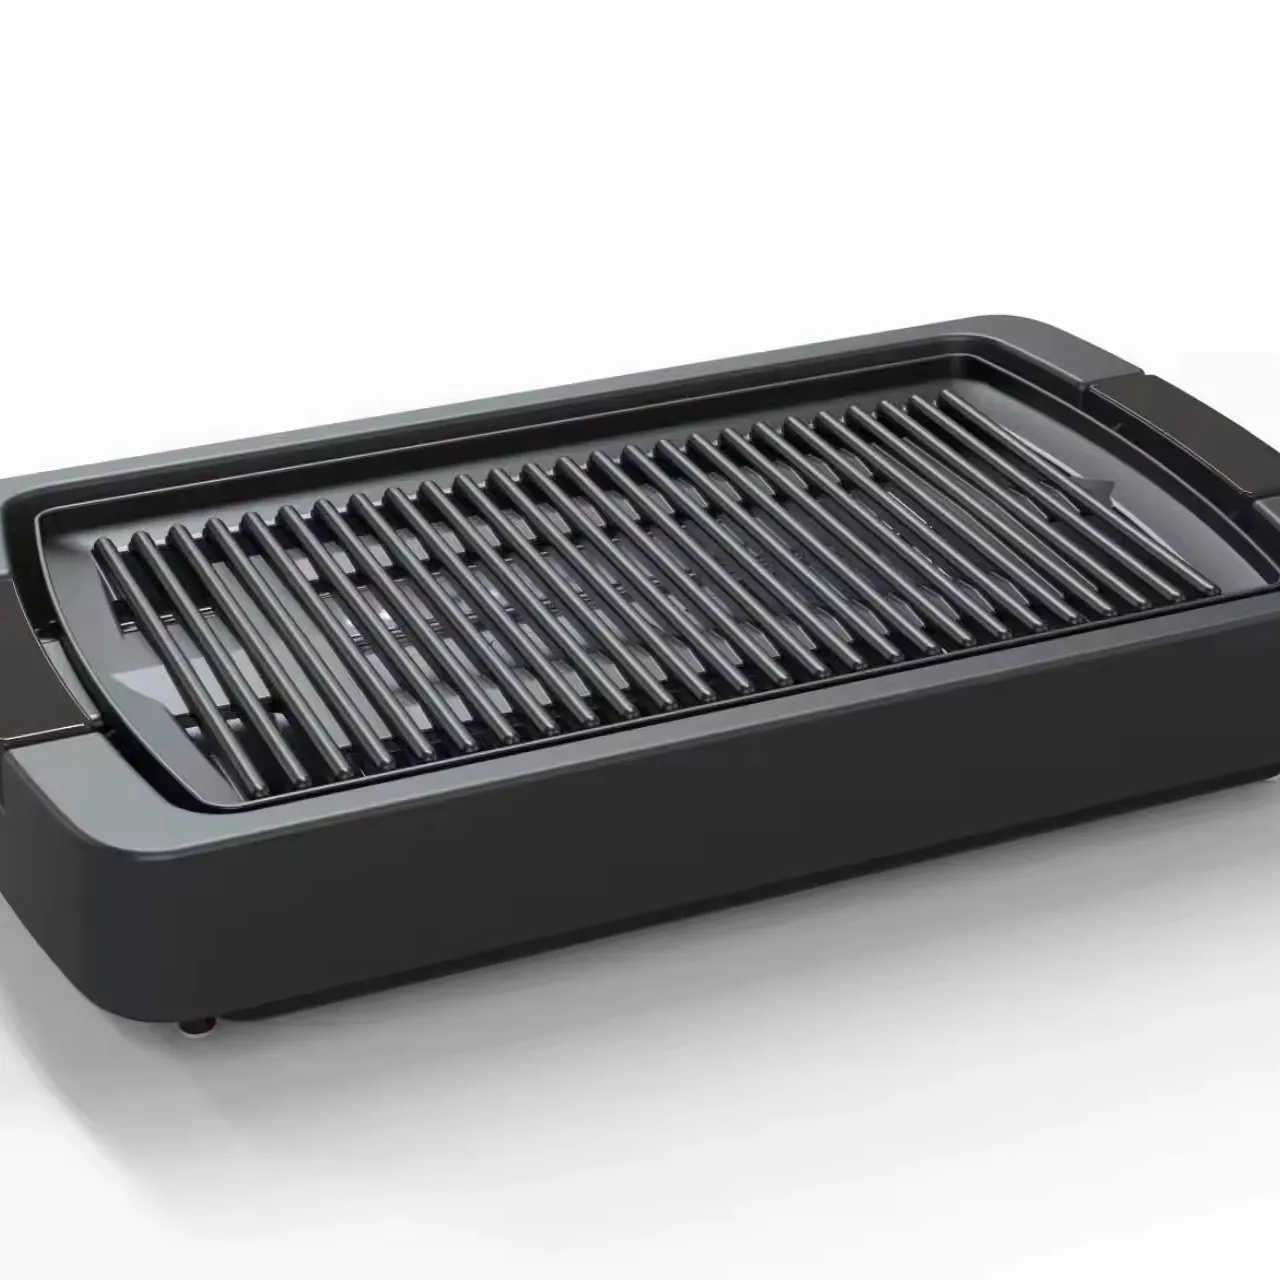 New Electric healthy Grill Non-stick coated BBQ Grill Griddle